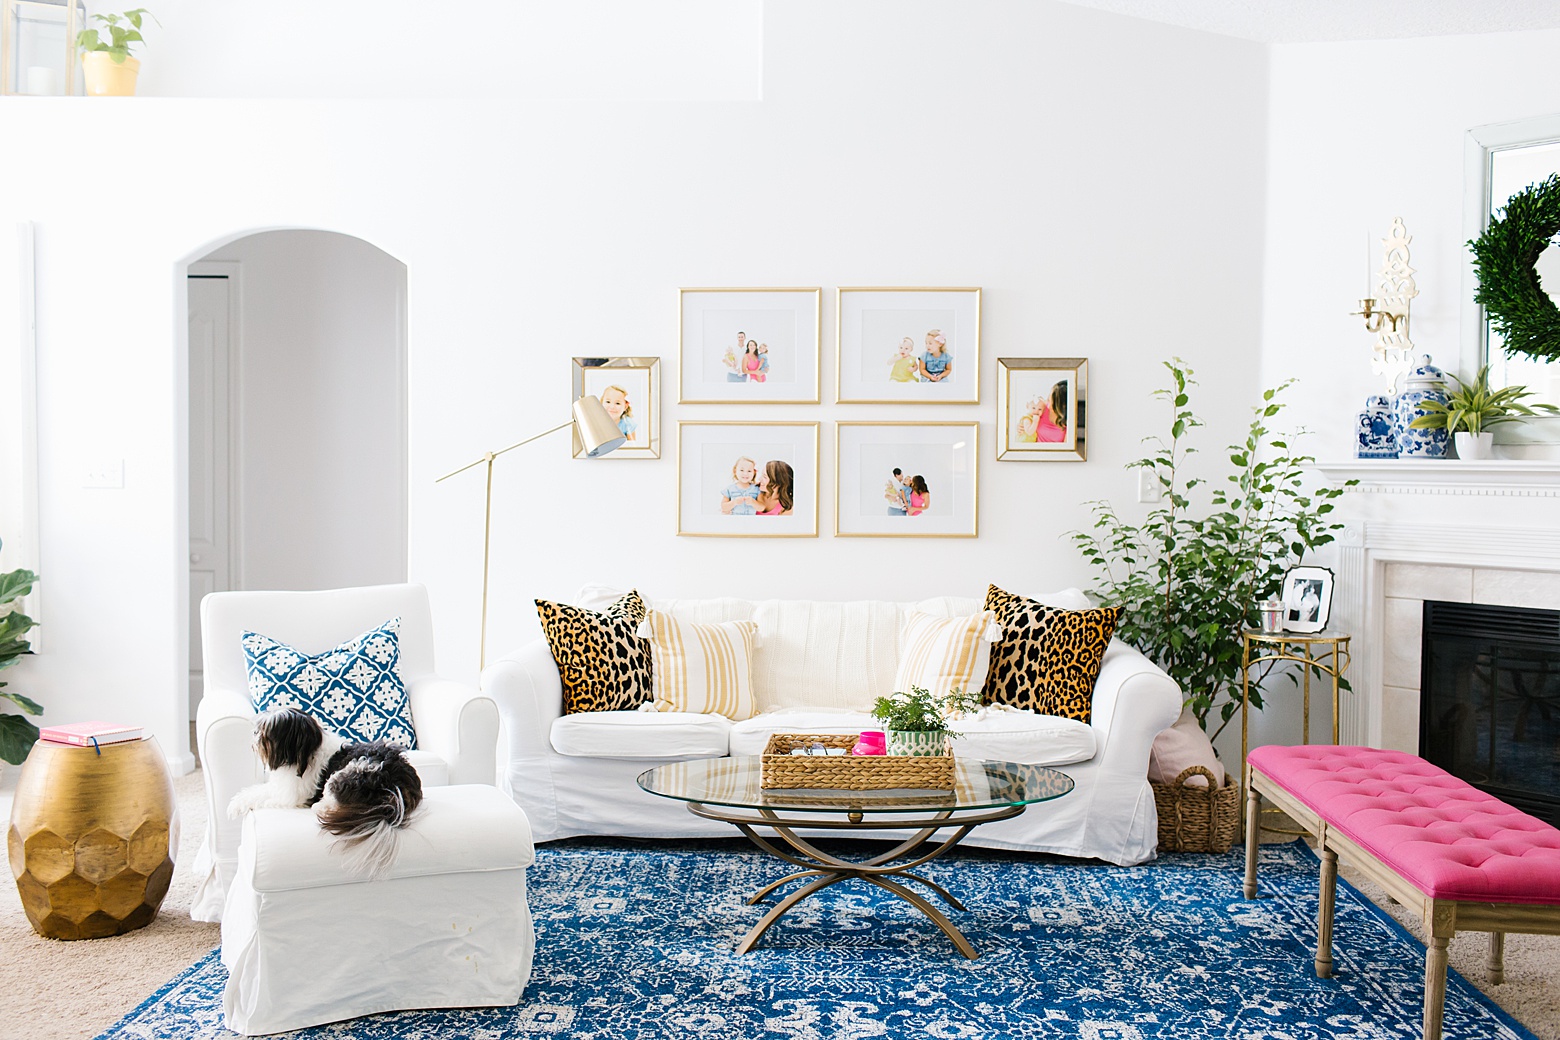 bright and colorful living room in navy, pink, green, mint and gold. navy and white rug, white sofa, open living room - designed by Megan Martin Creative